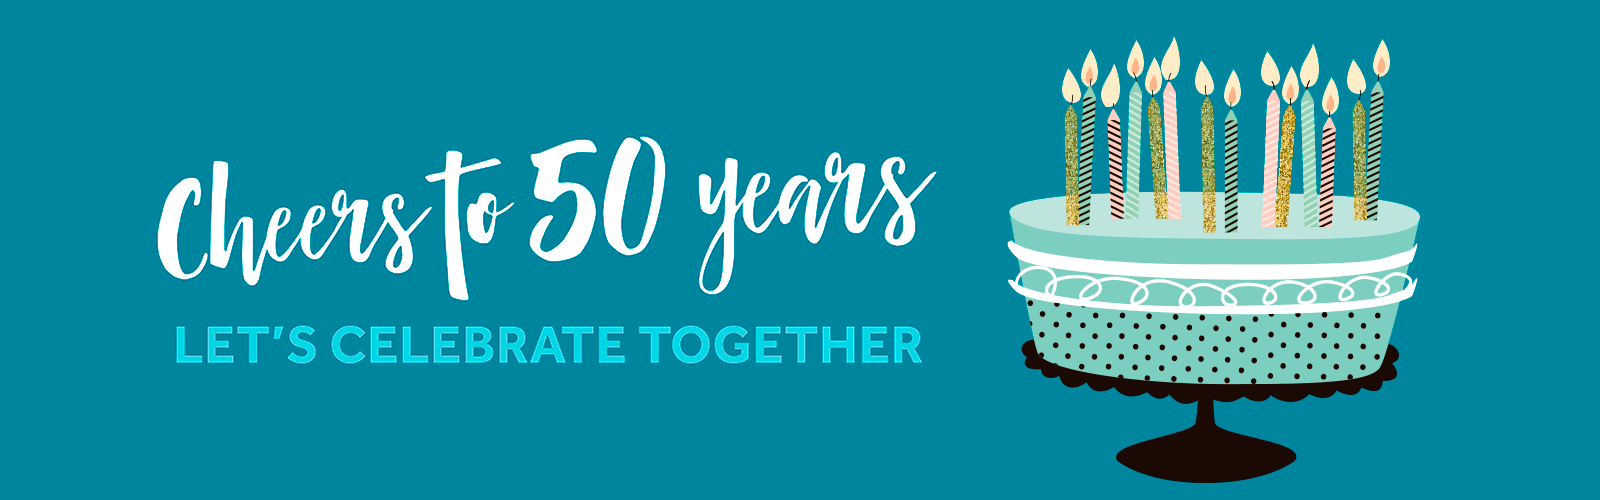 Cheers to 50 Years!